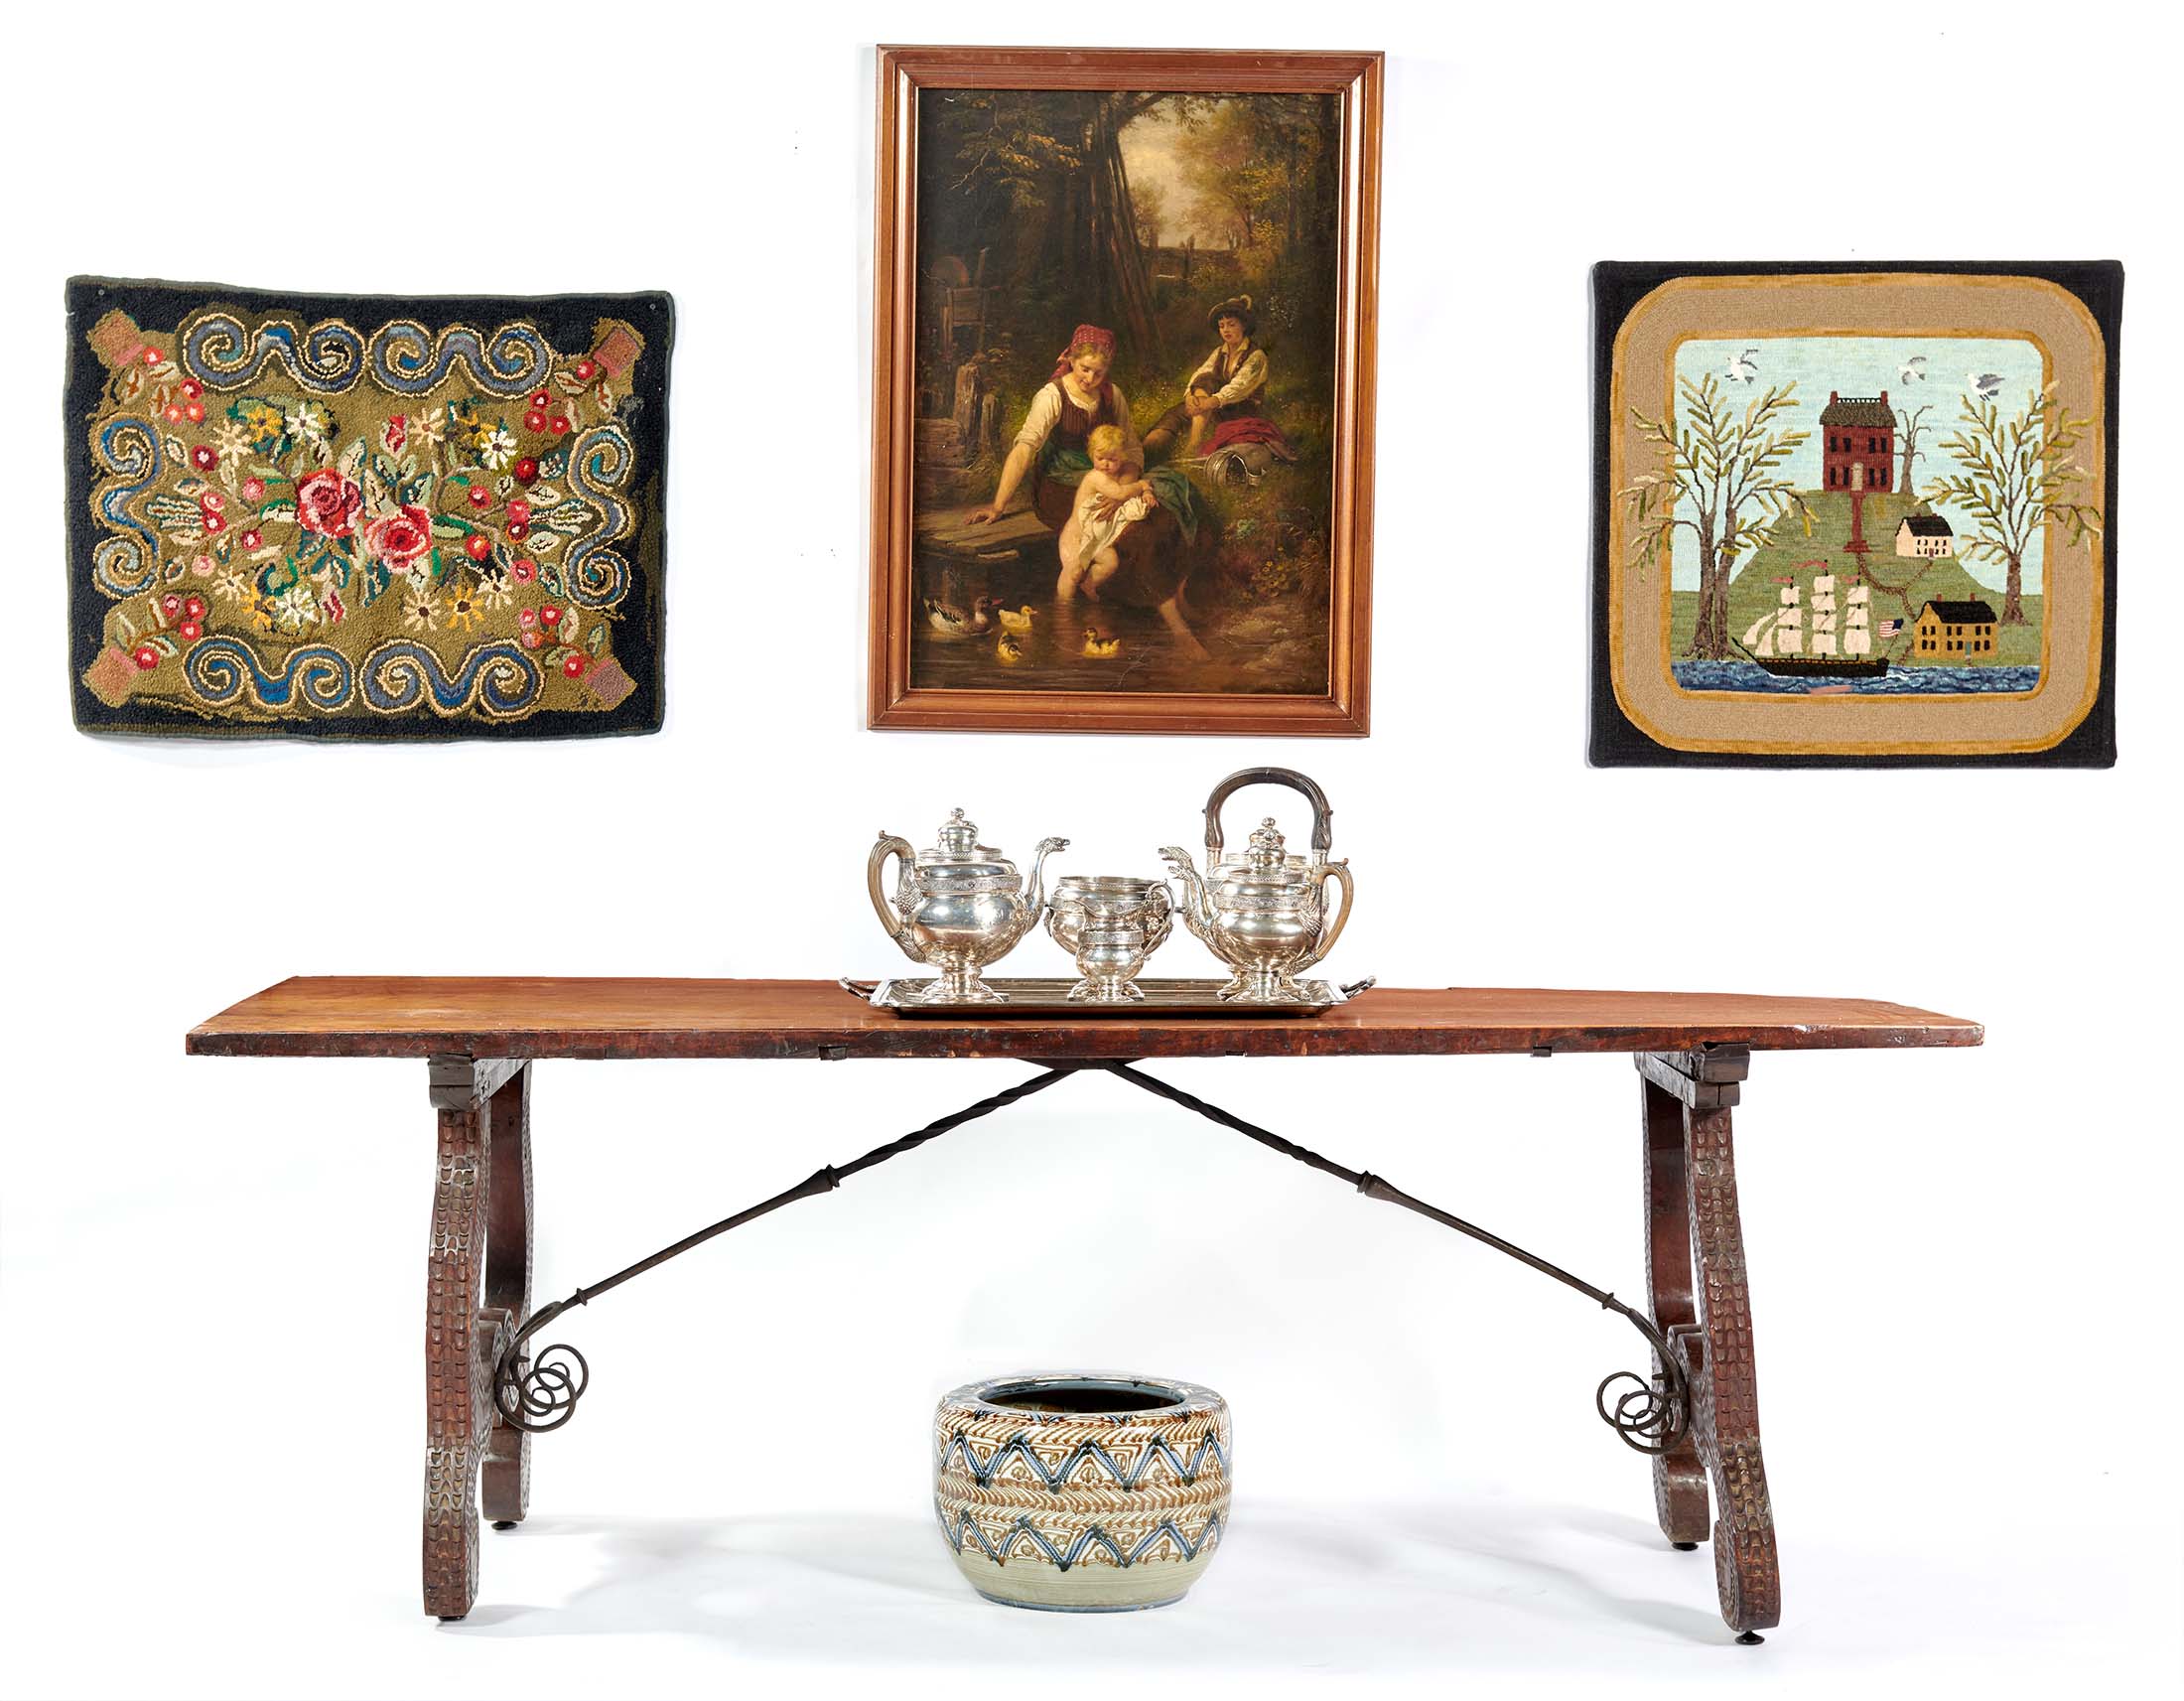 Hap Moore Antiques Auctions Goodwin Building 611 U S Route One York Maine Auction Of Estate Antiques September 26 Sold Auction Attendees May Reserve A Seat And Register To Bid After Previewing In View Of Limited Seating